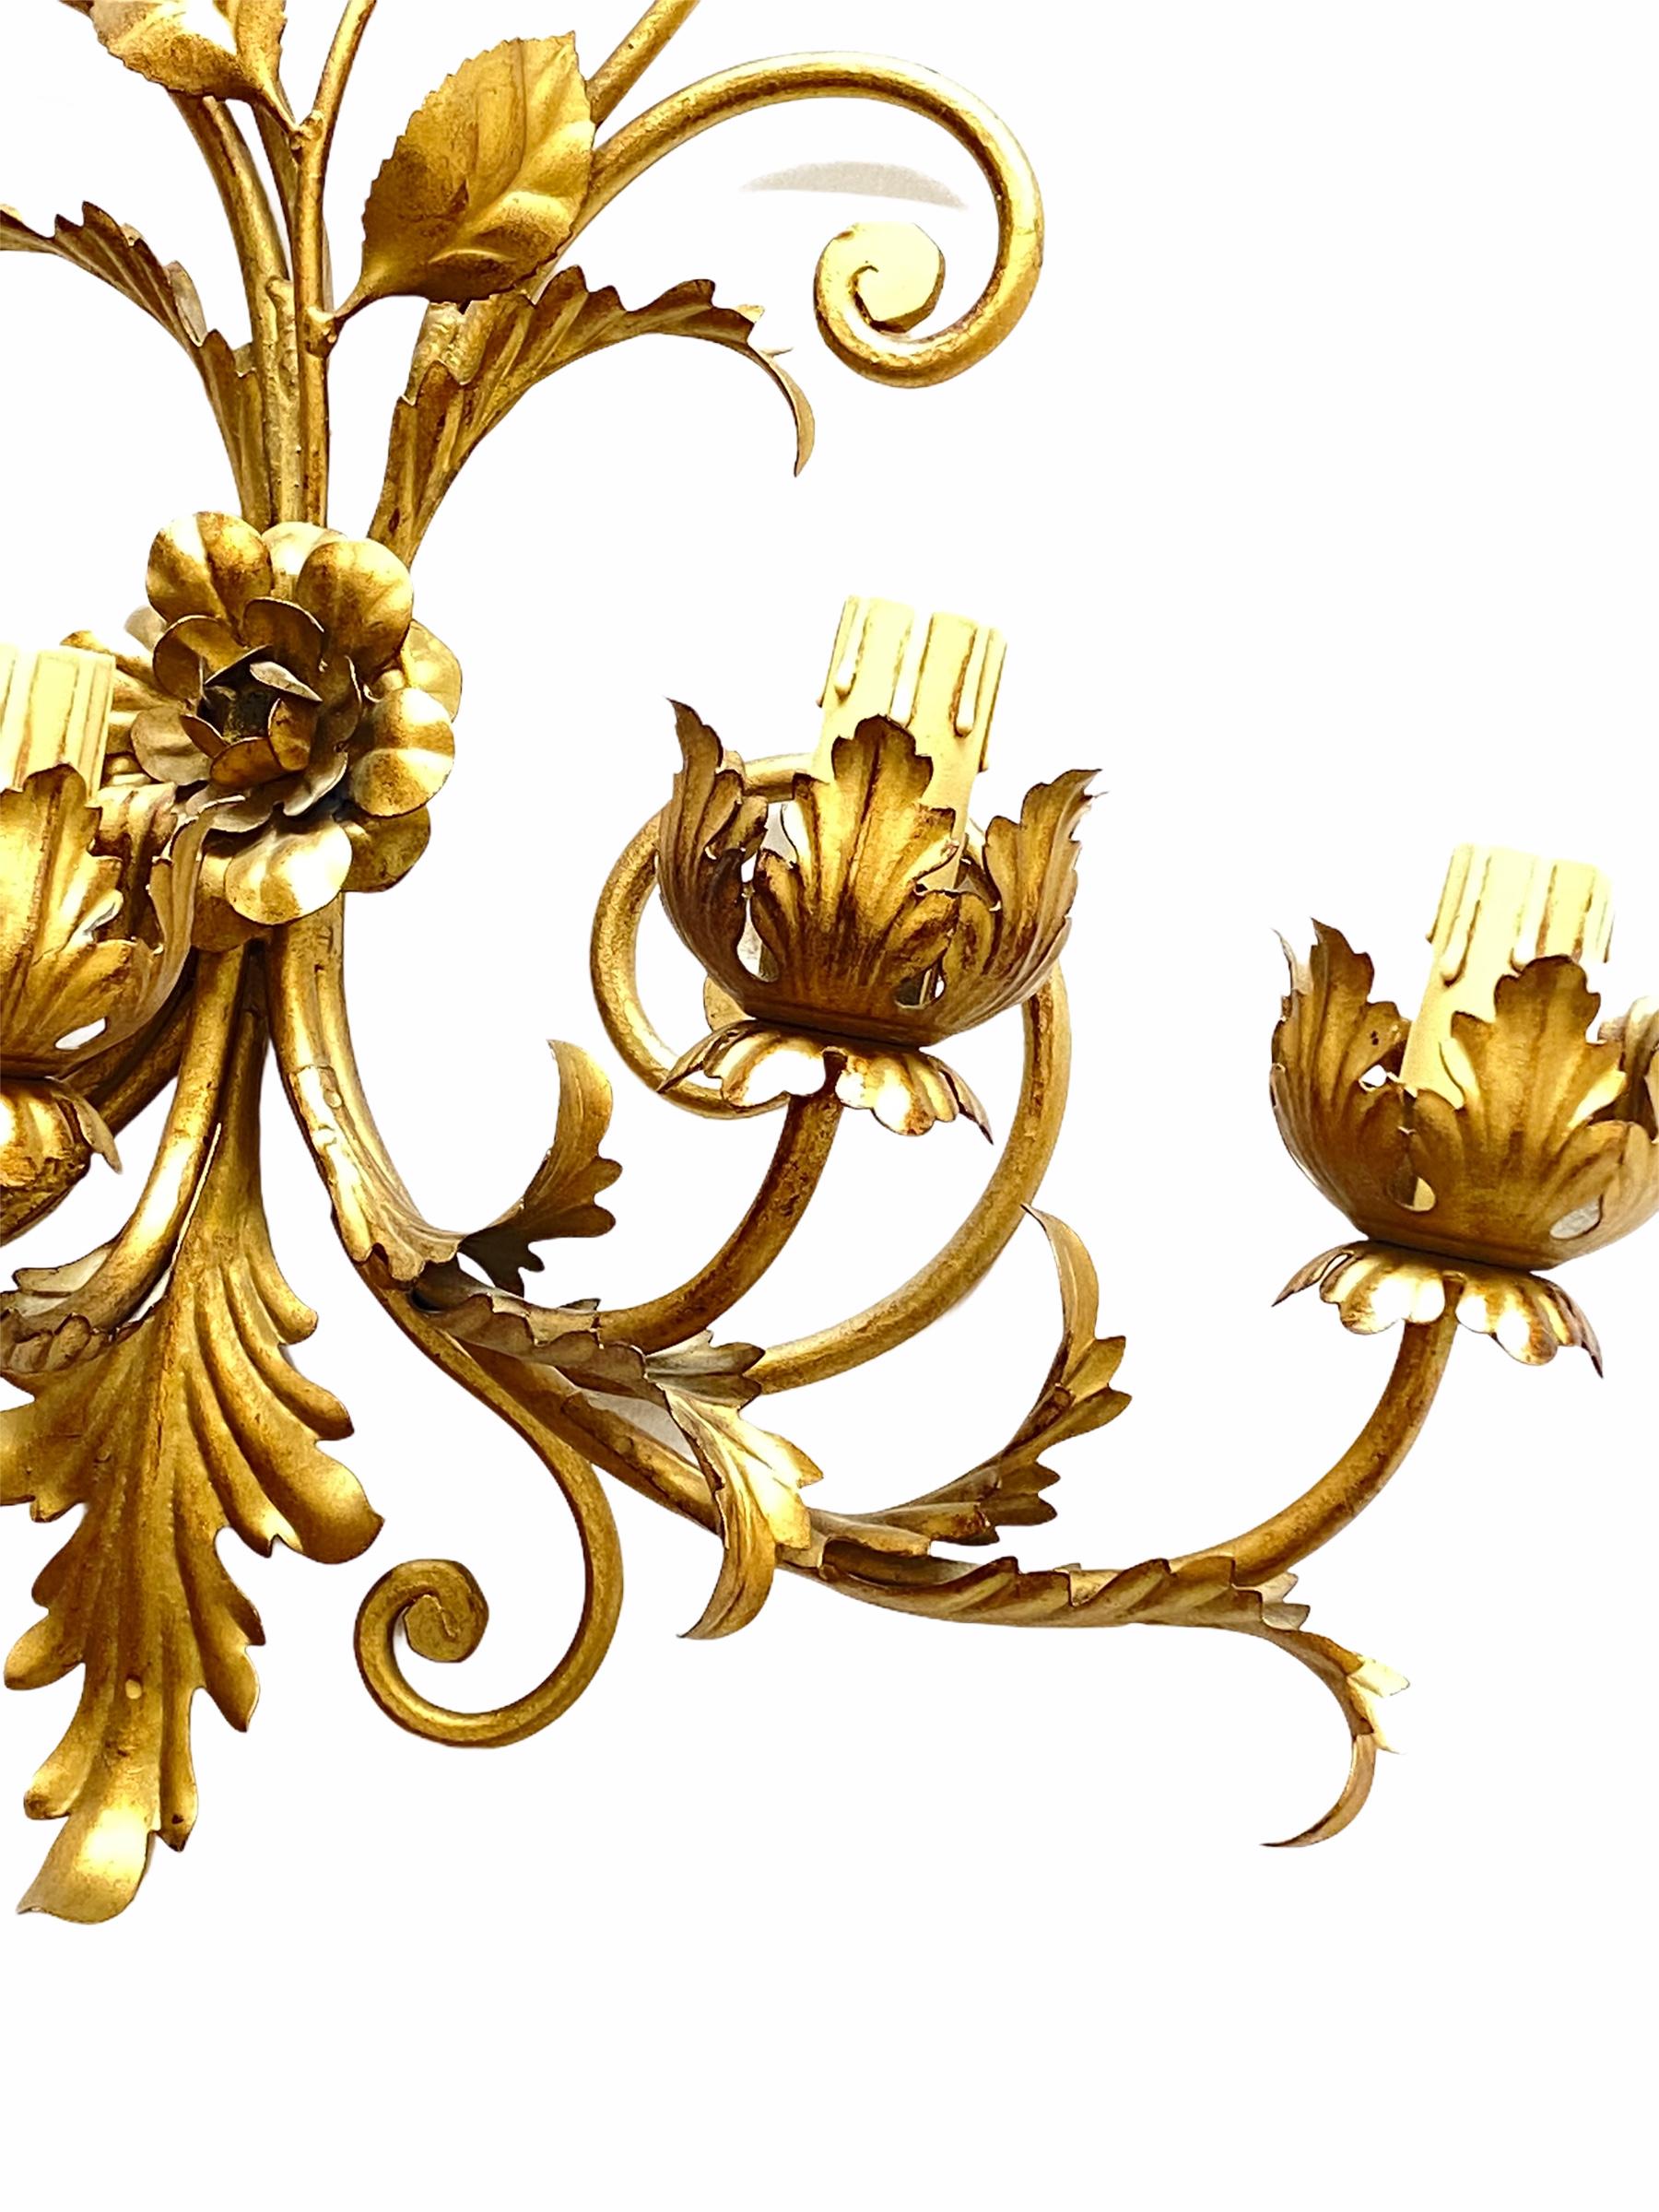 Mid-20th Century Stunning Five-Light Gilt Metal Leafs Tole Hollywood Regency Sconce, Italy, 1960s For Sale